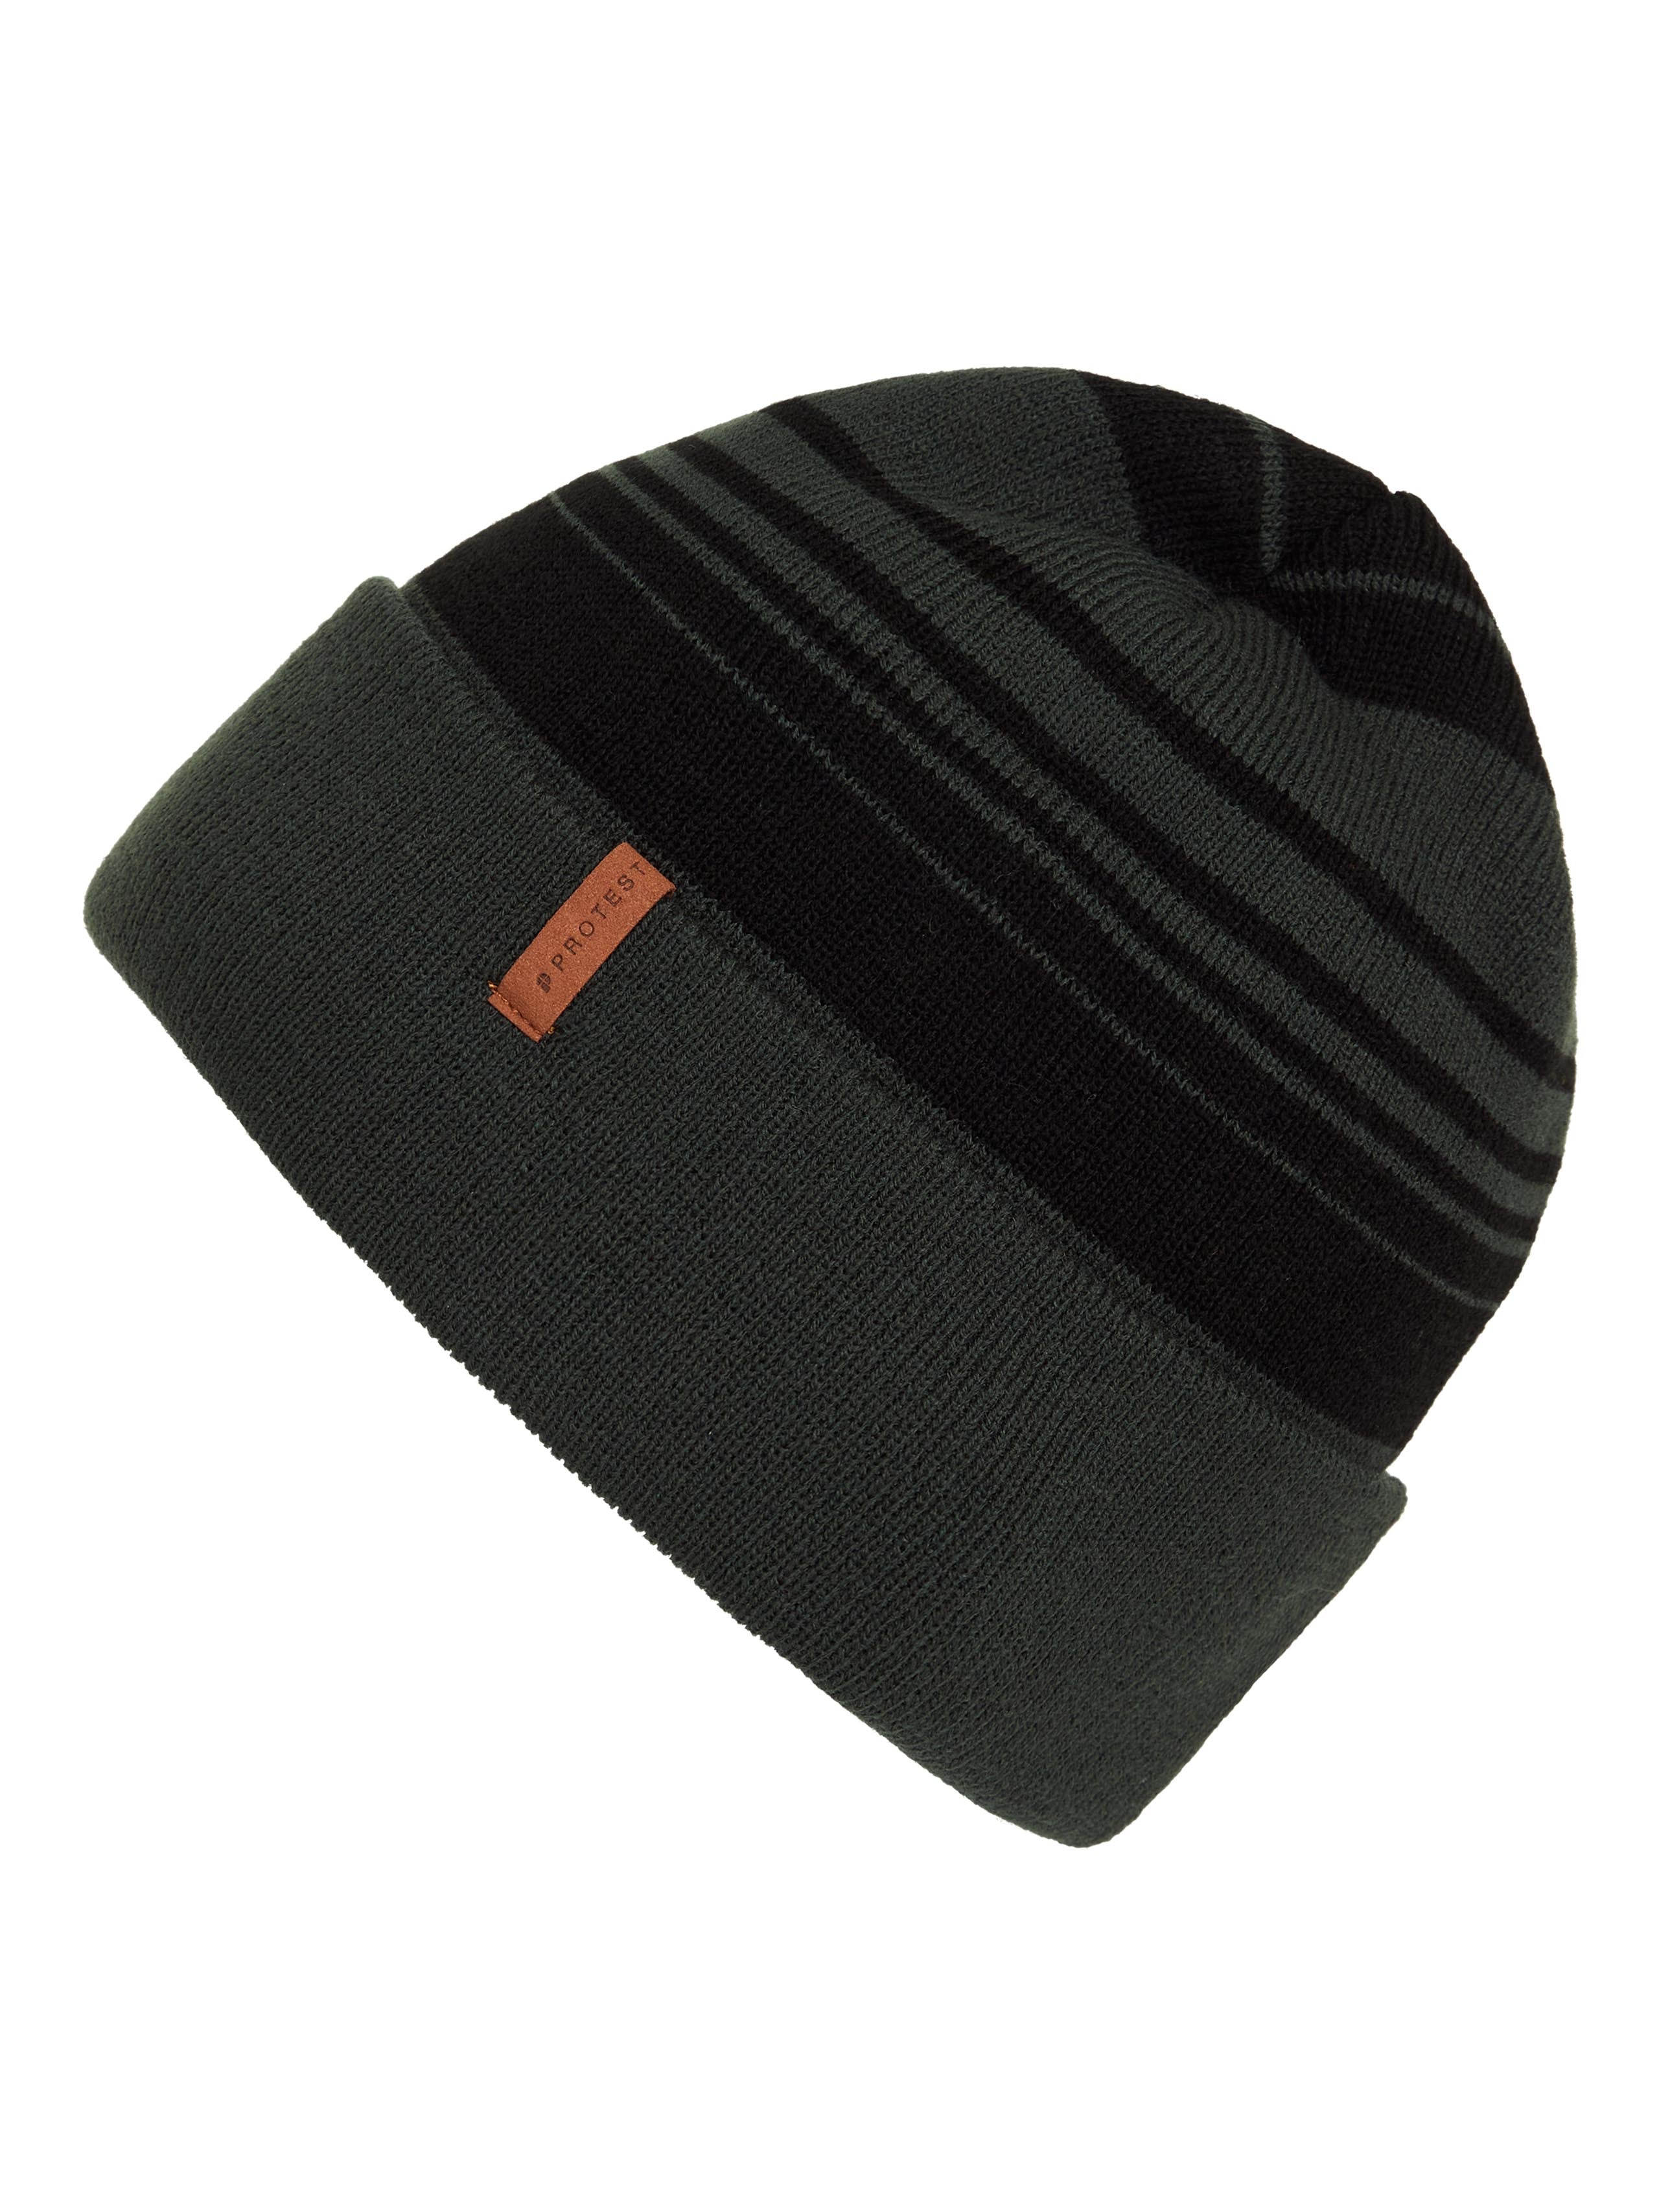 PRTSPOTTED beanie